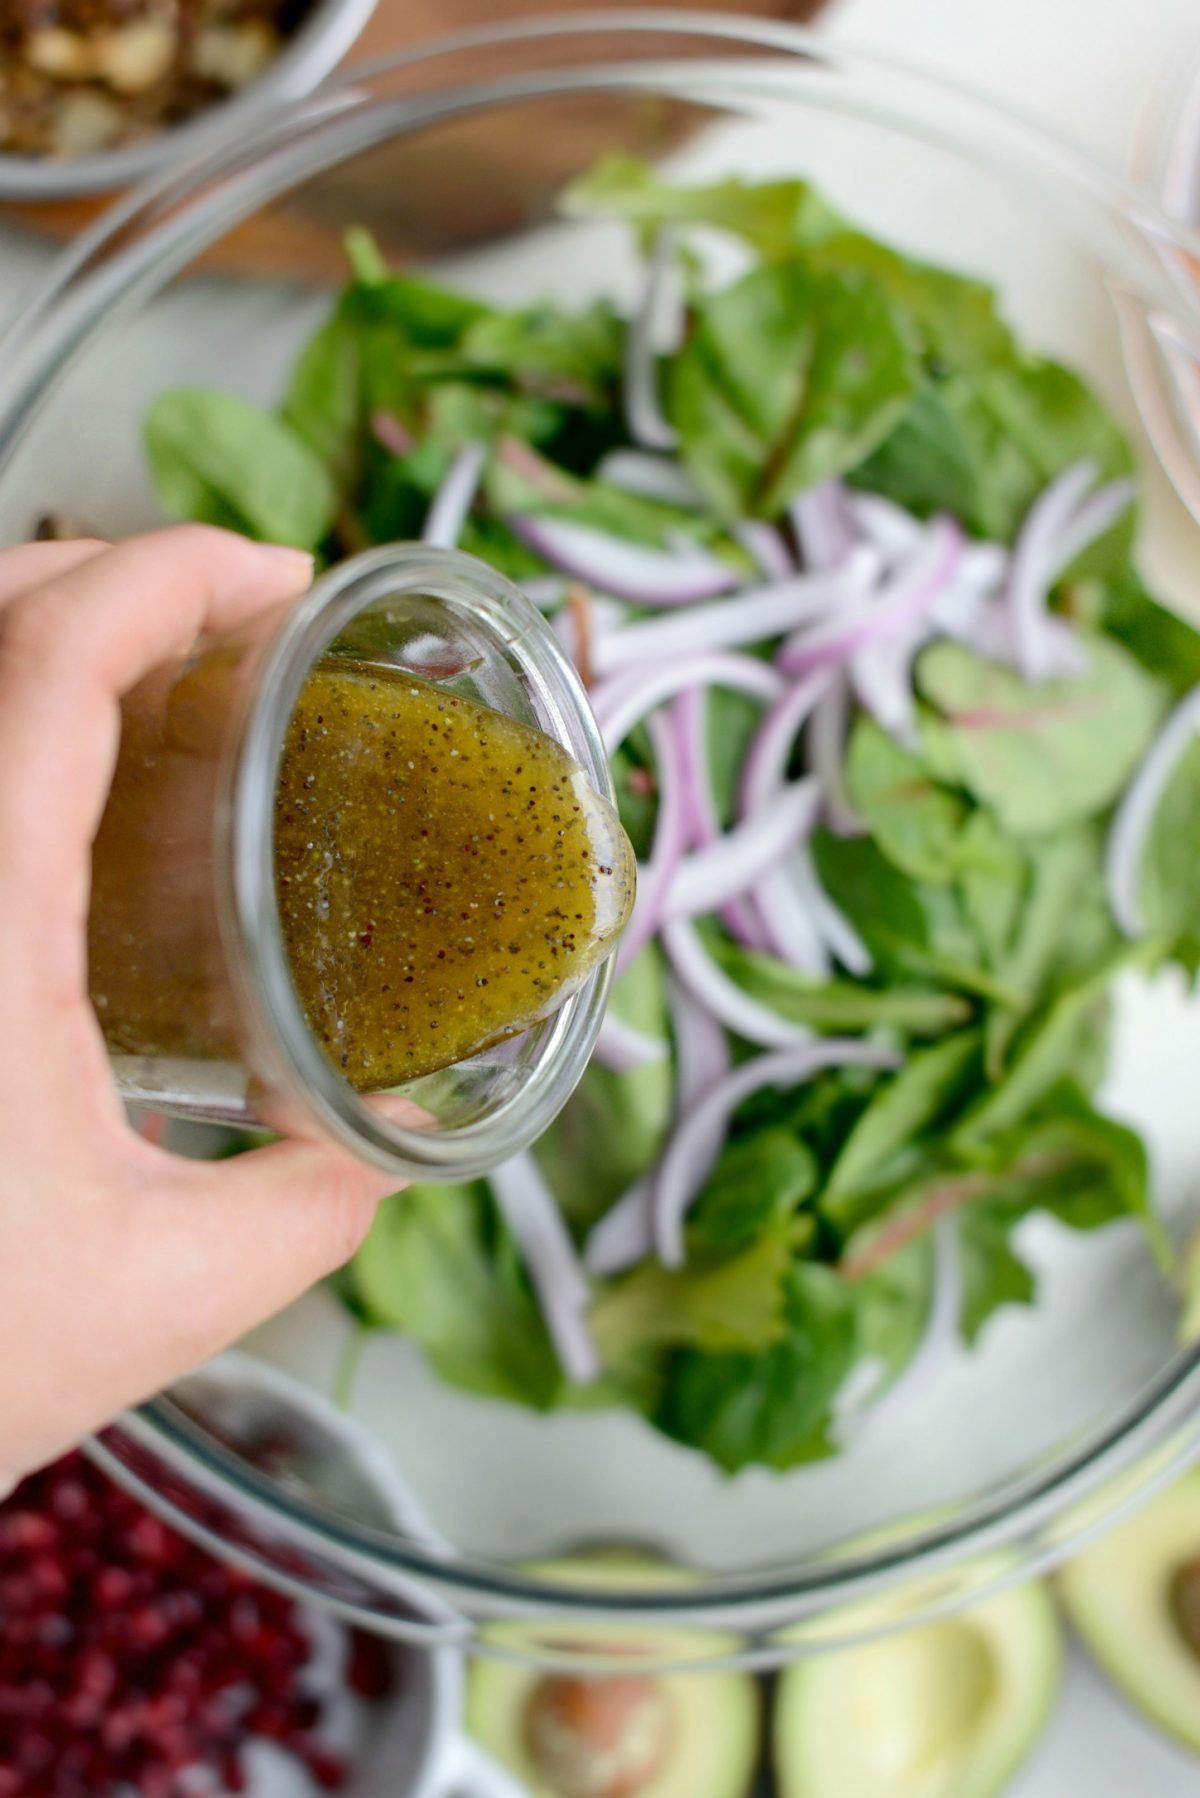 pour a little dressing over salad greens and onions